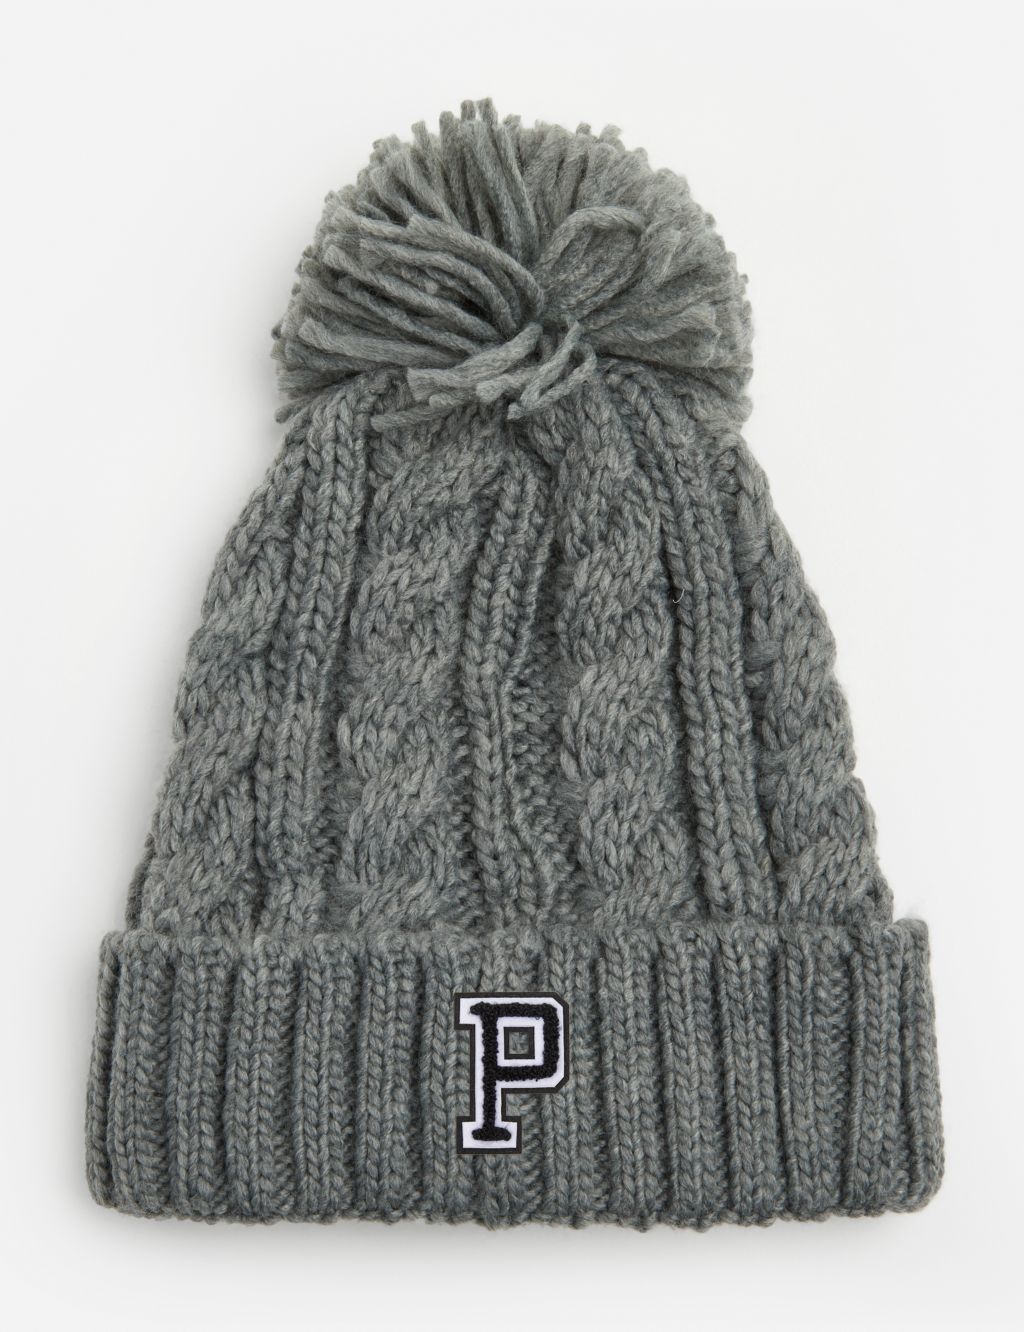 Personalised Adults Beanie image 1